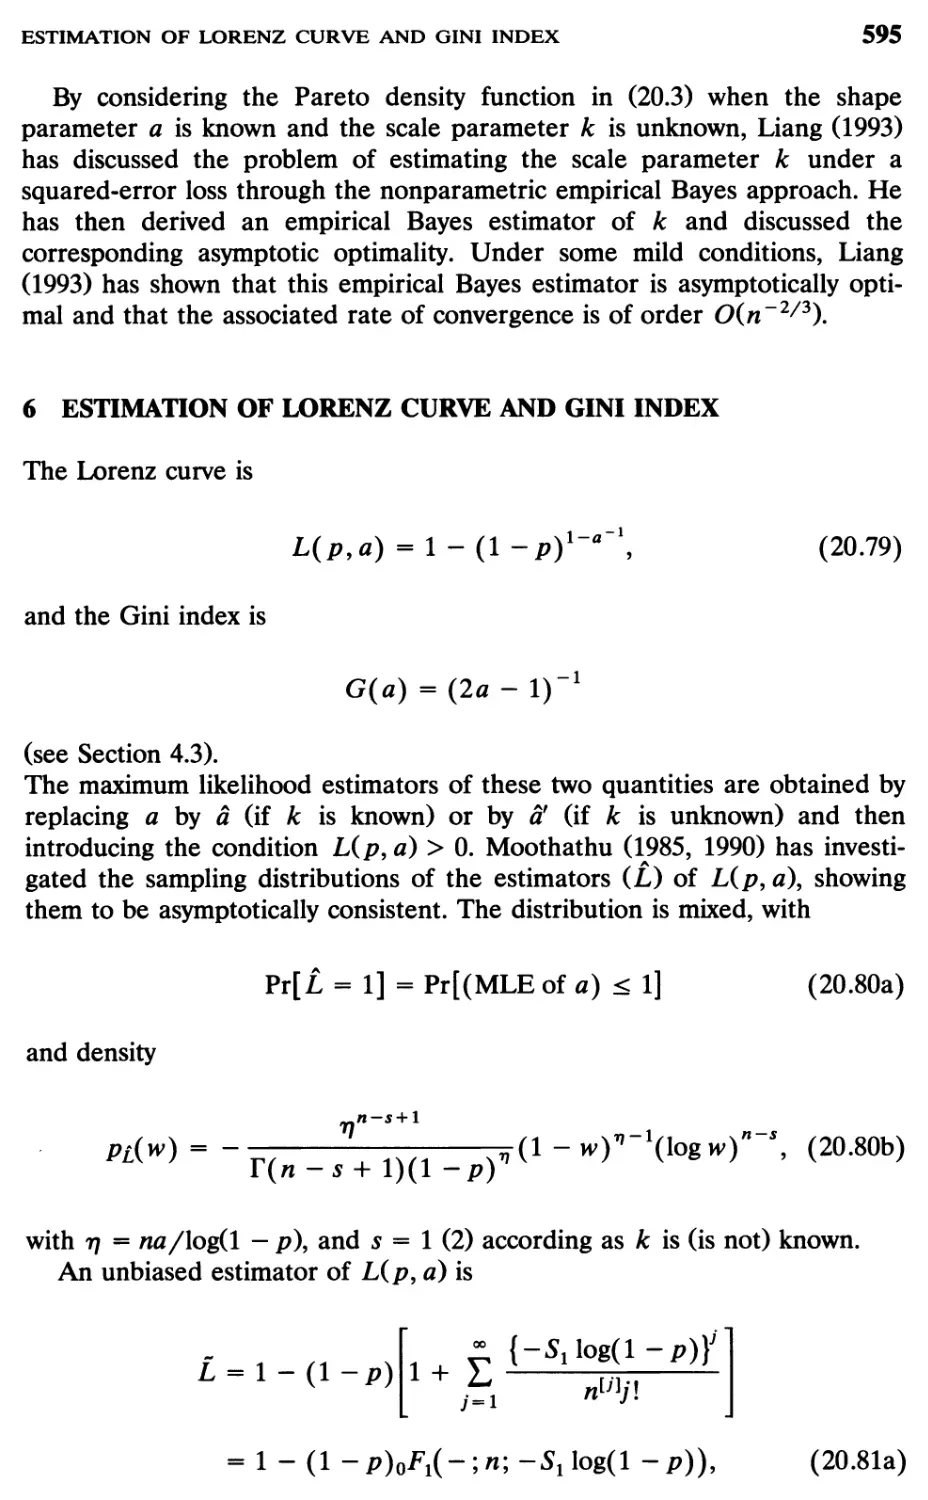 6 Estimation of Lorenz Curve and Gini Index, 595